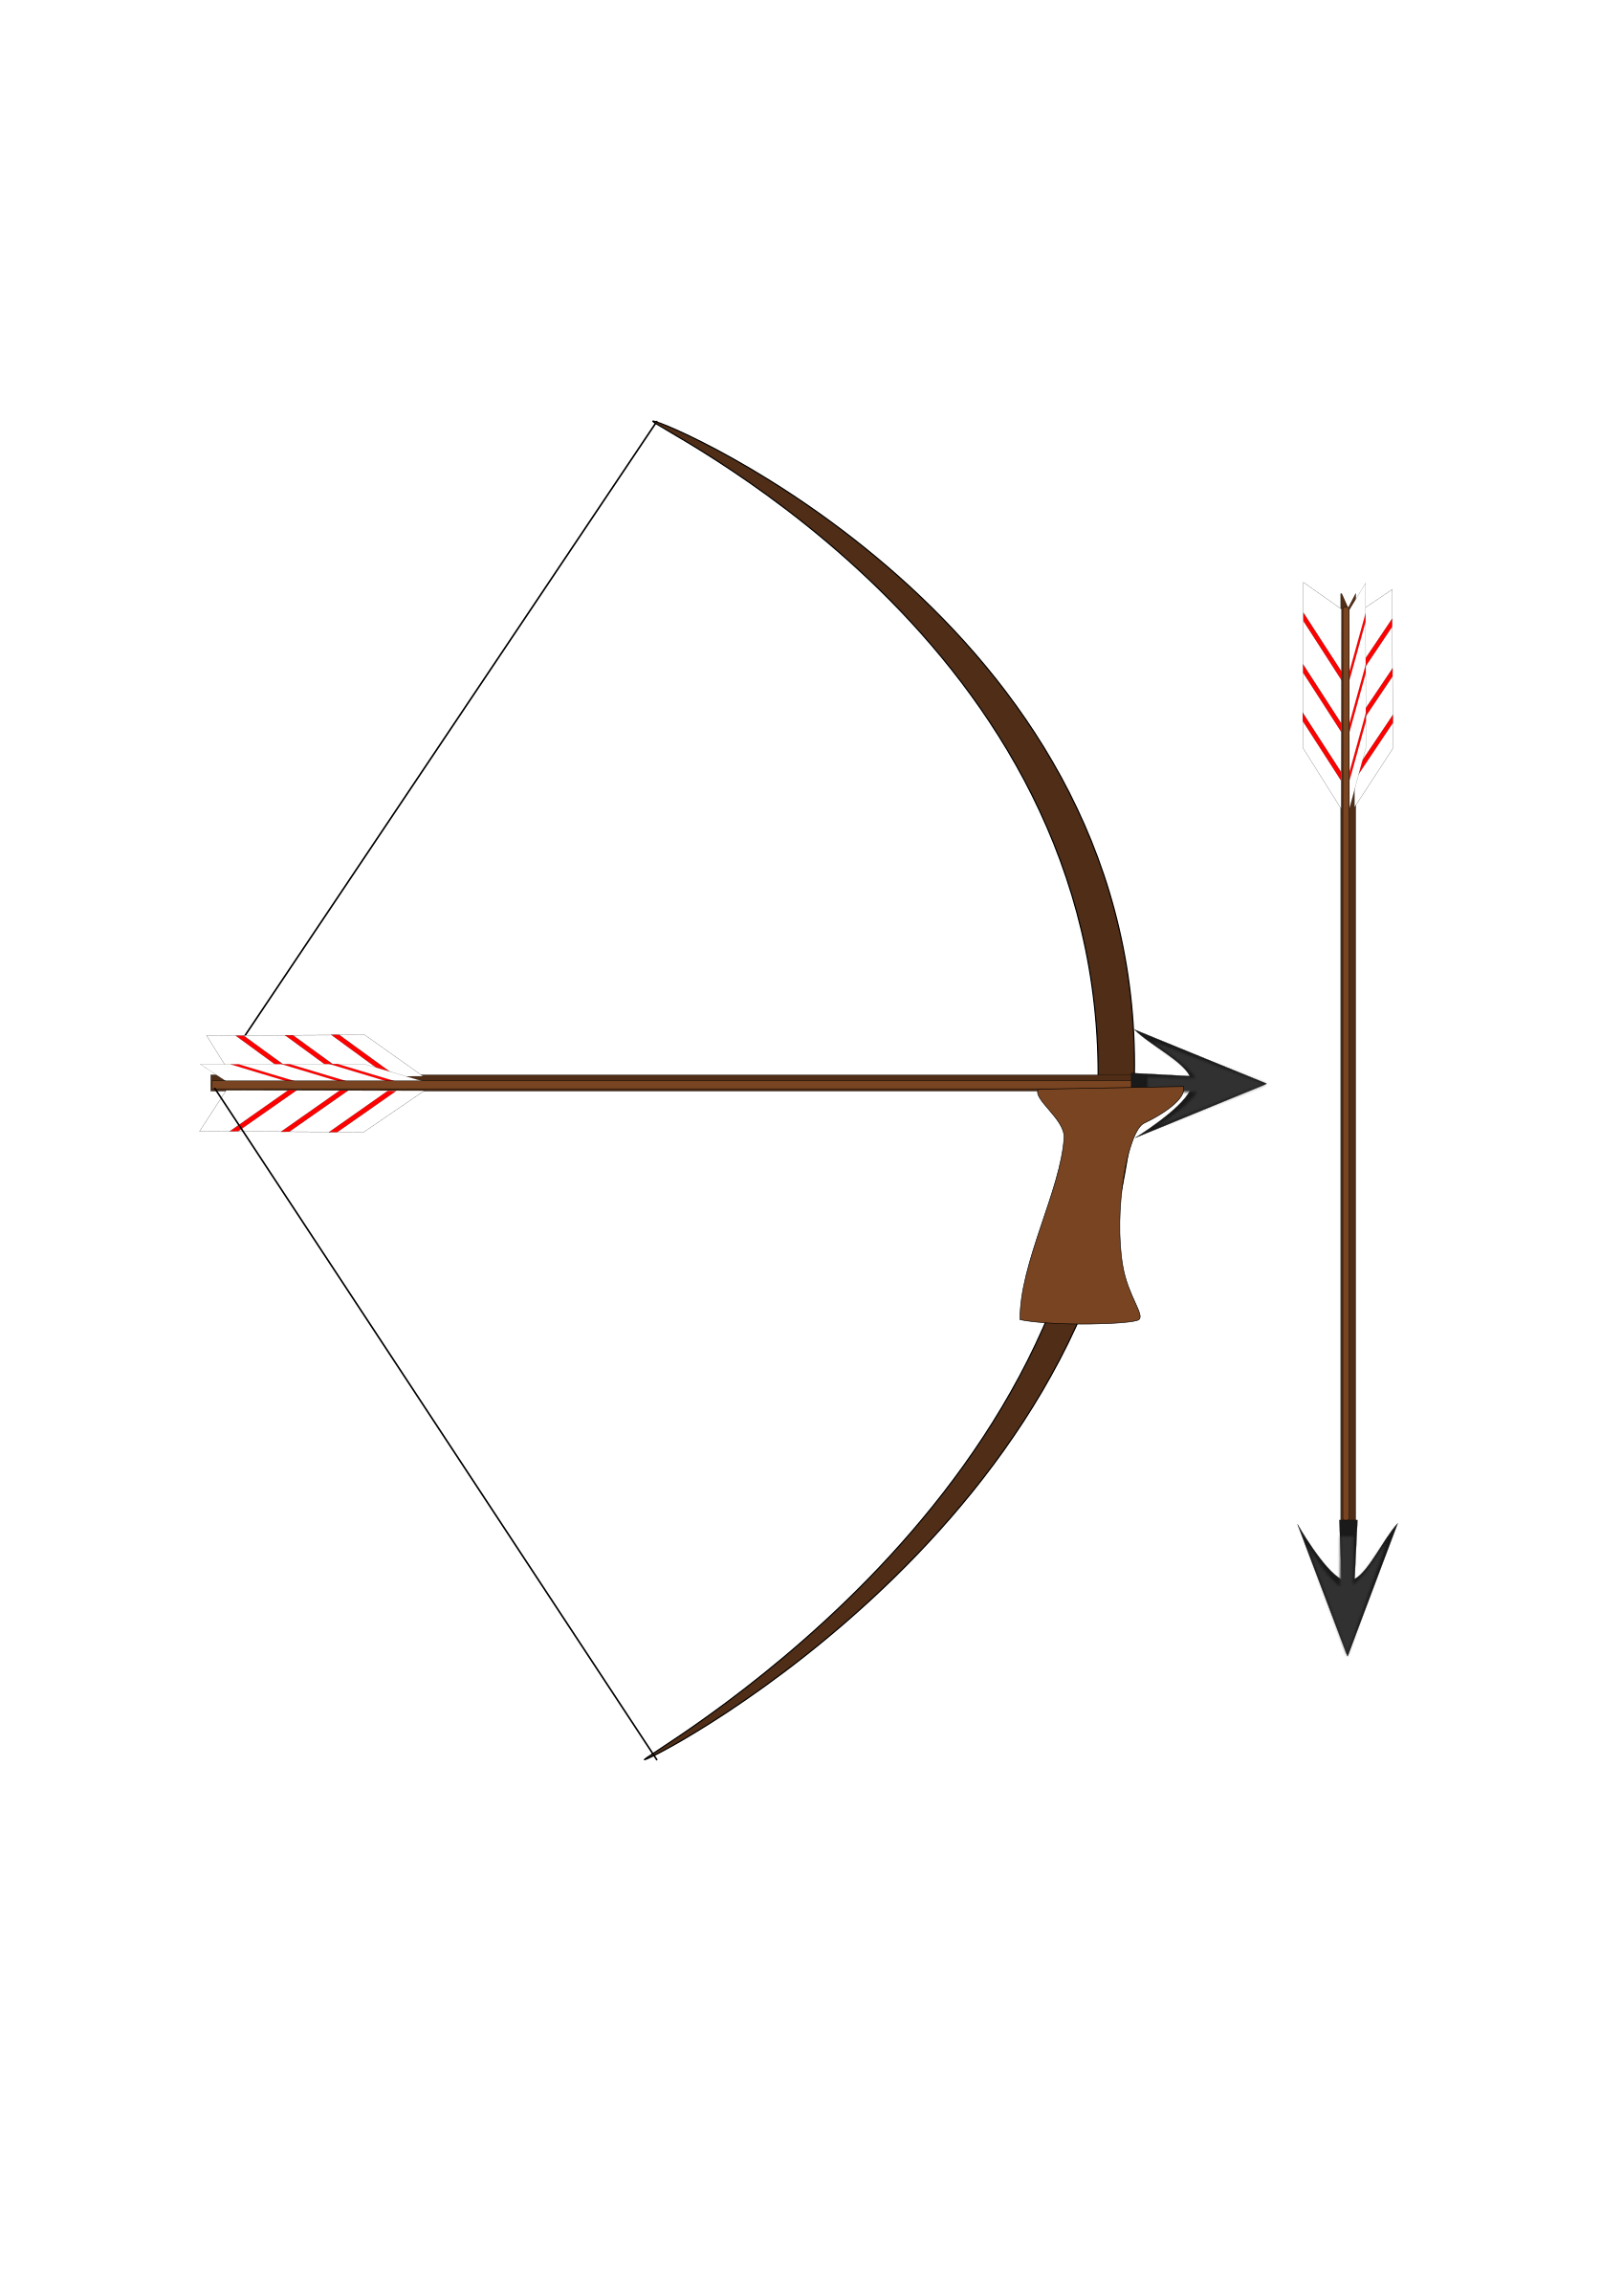 Arrow Bow Download Free Image PNG Image